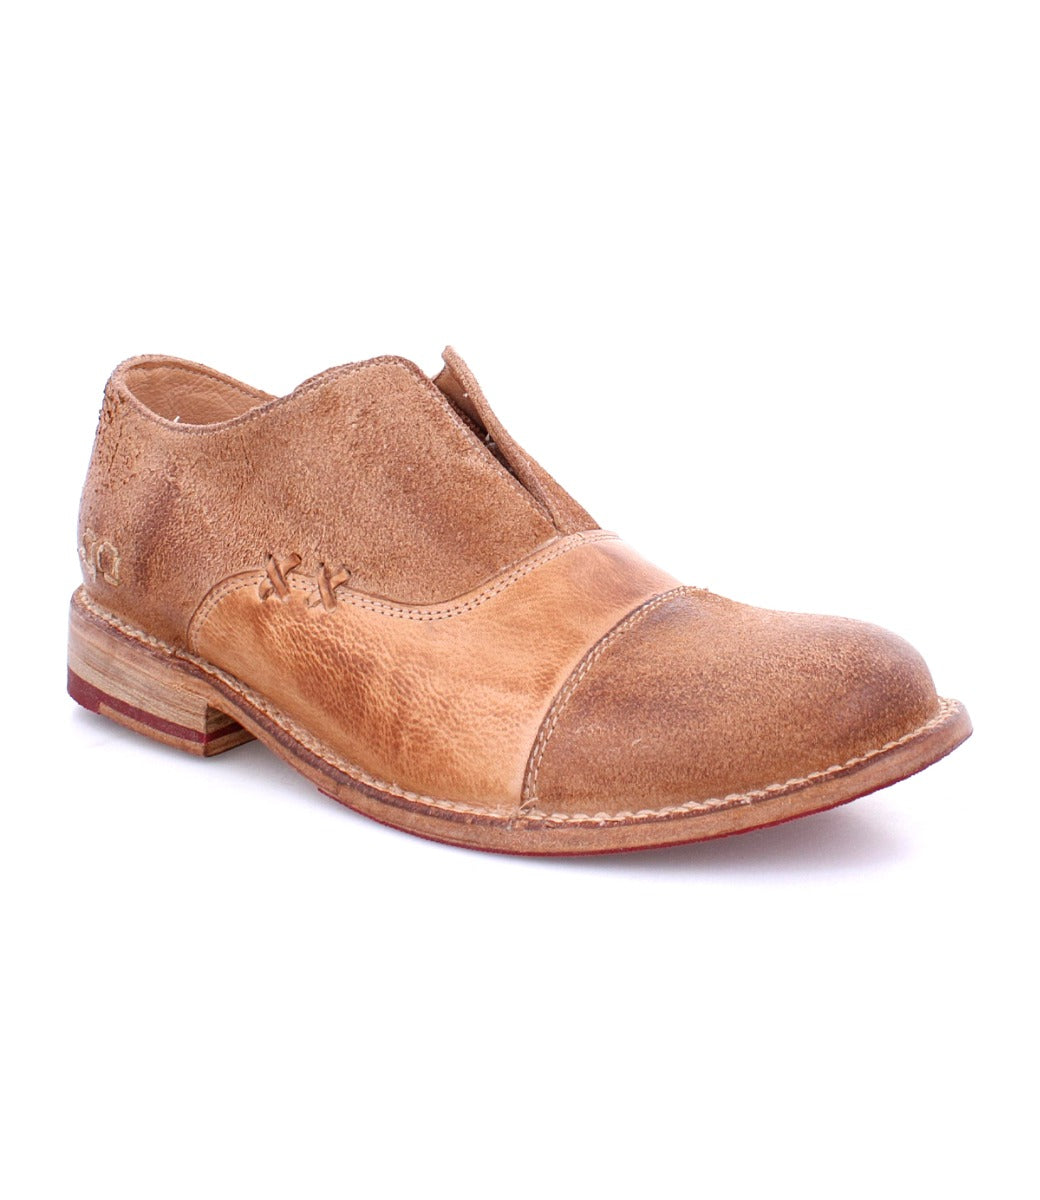 A pair of Bed Stu Garden M men's brown shoes with a tan sole.